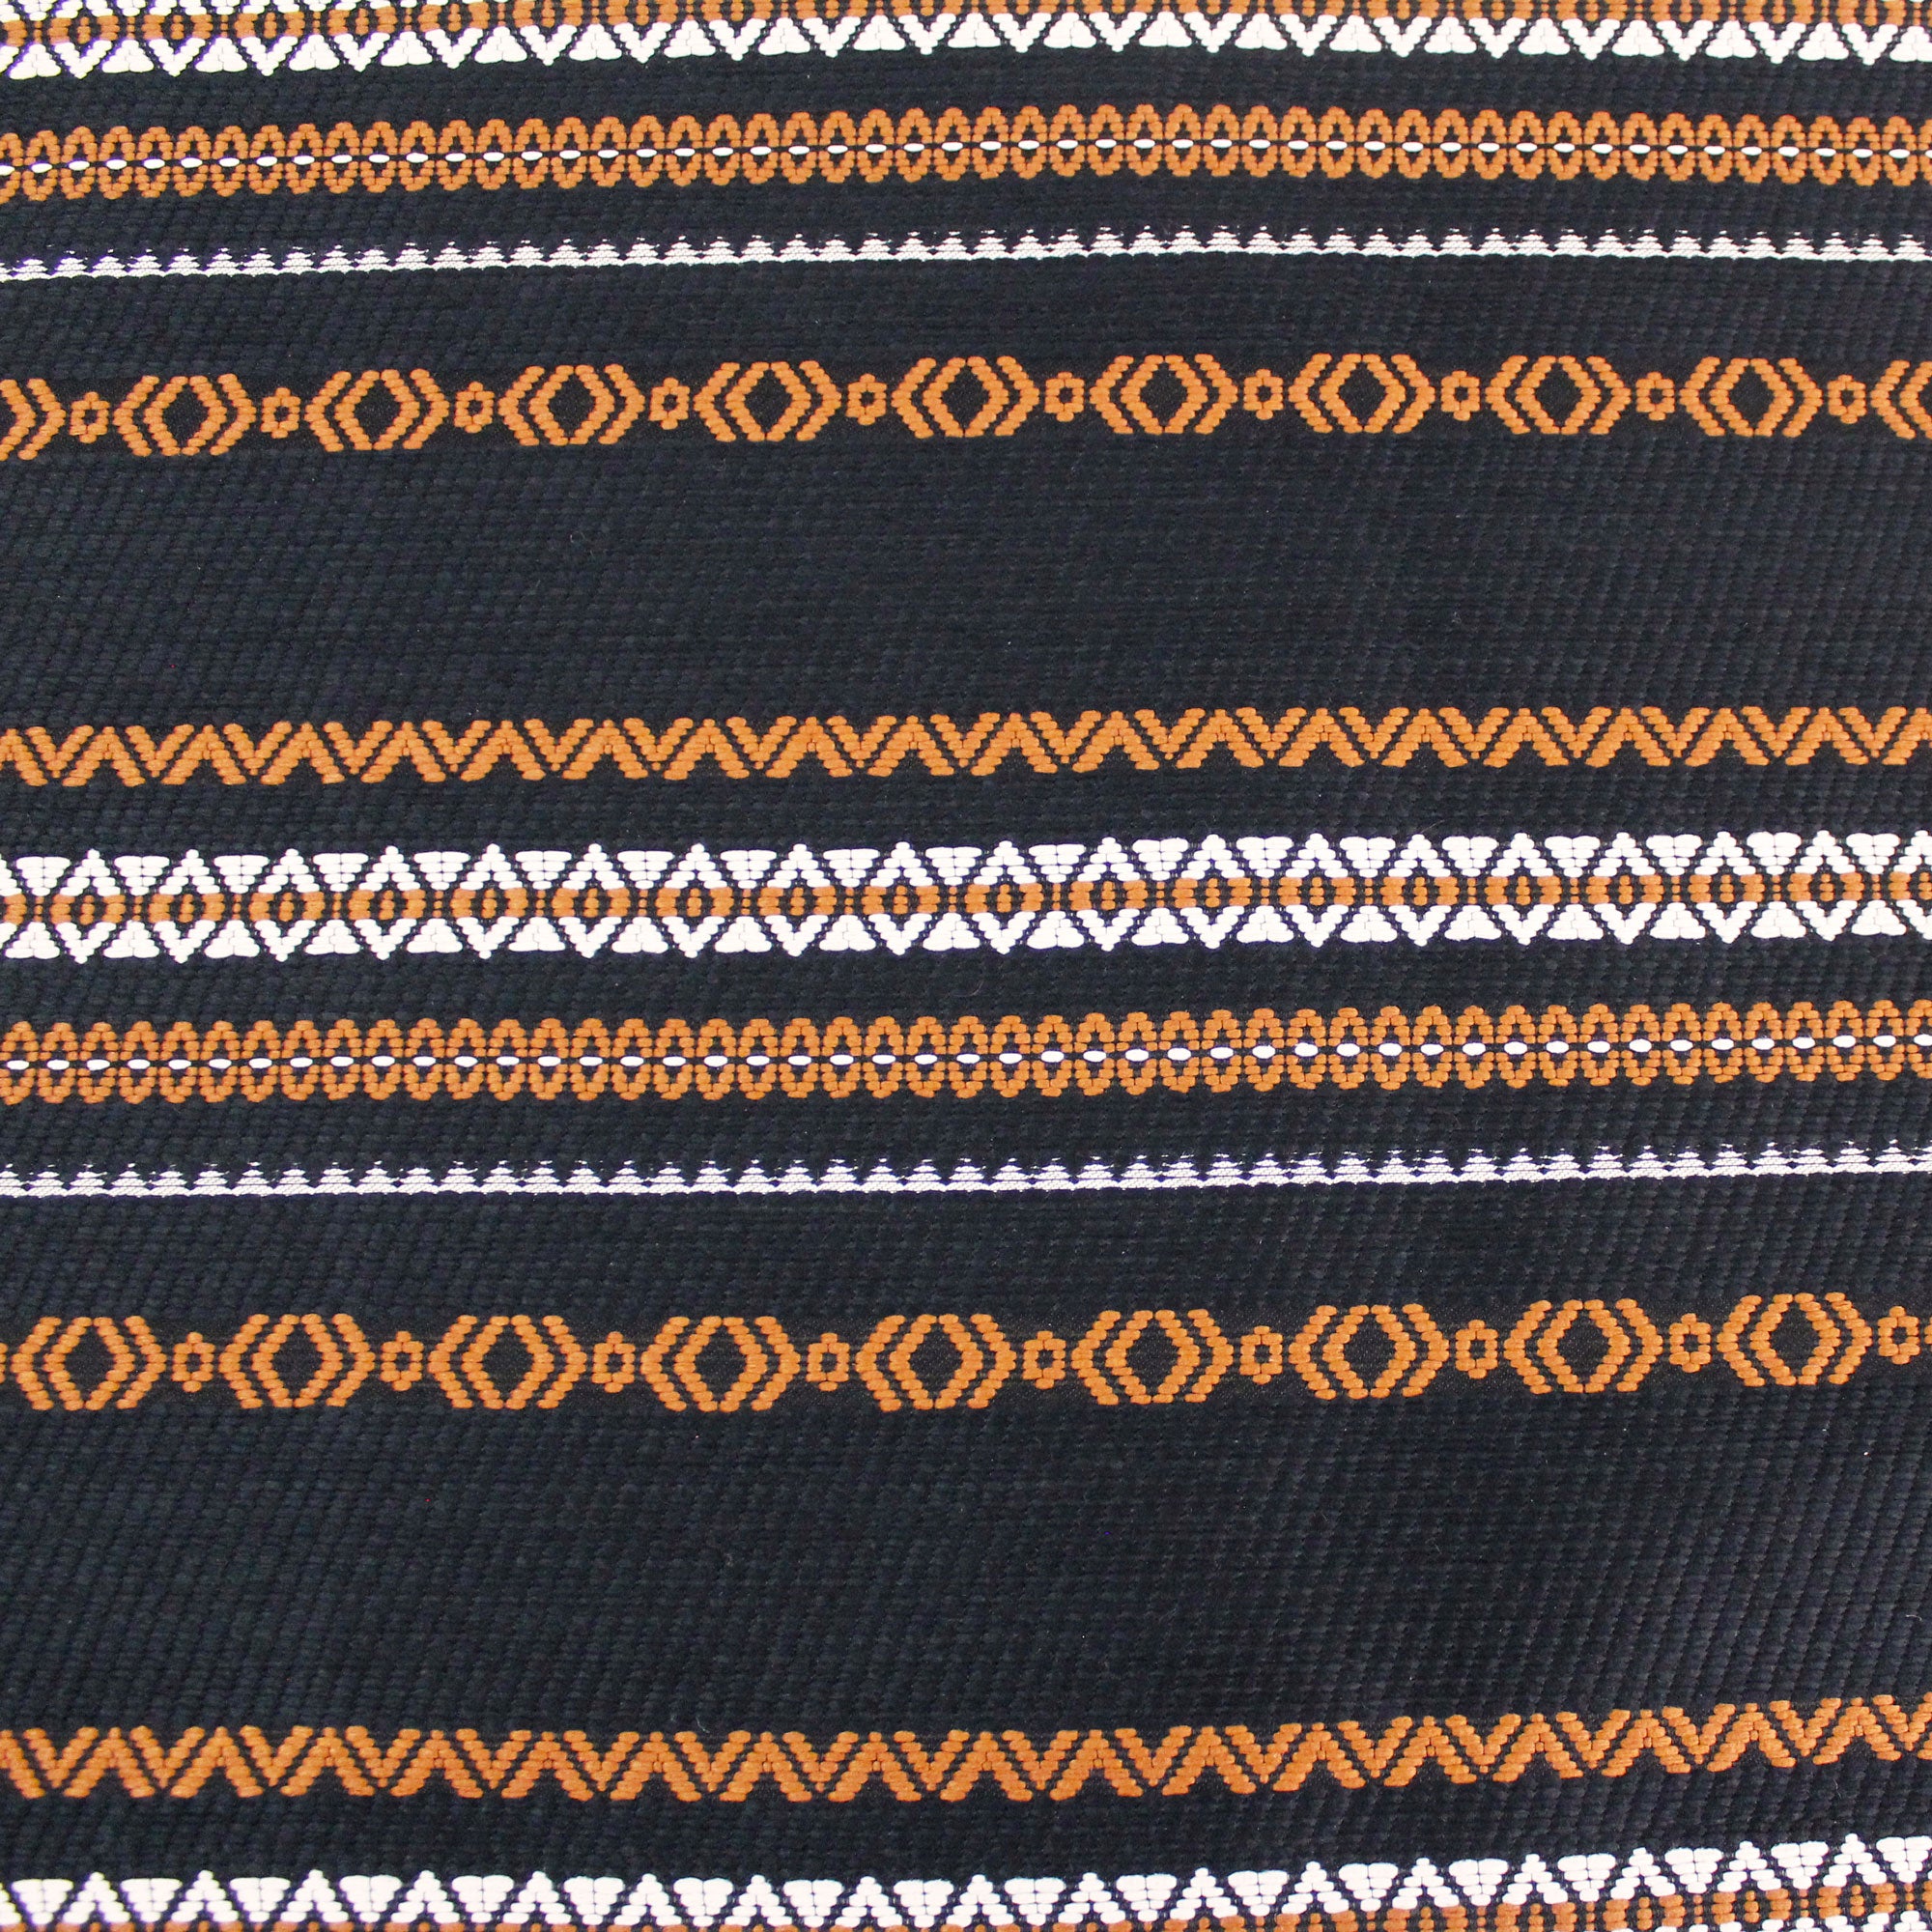 Cotton jacquard fabric with brown and white graphic patterns